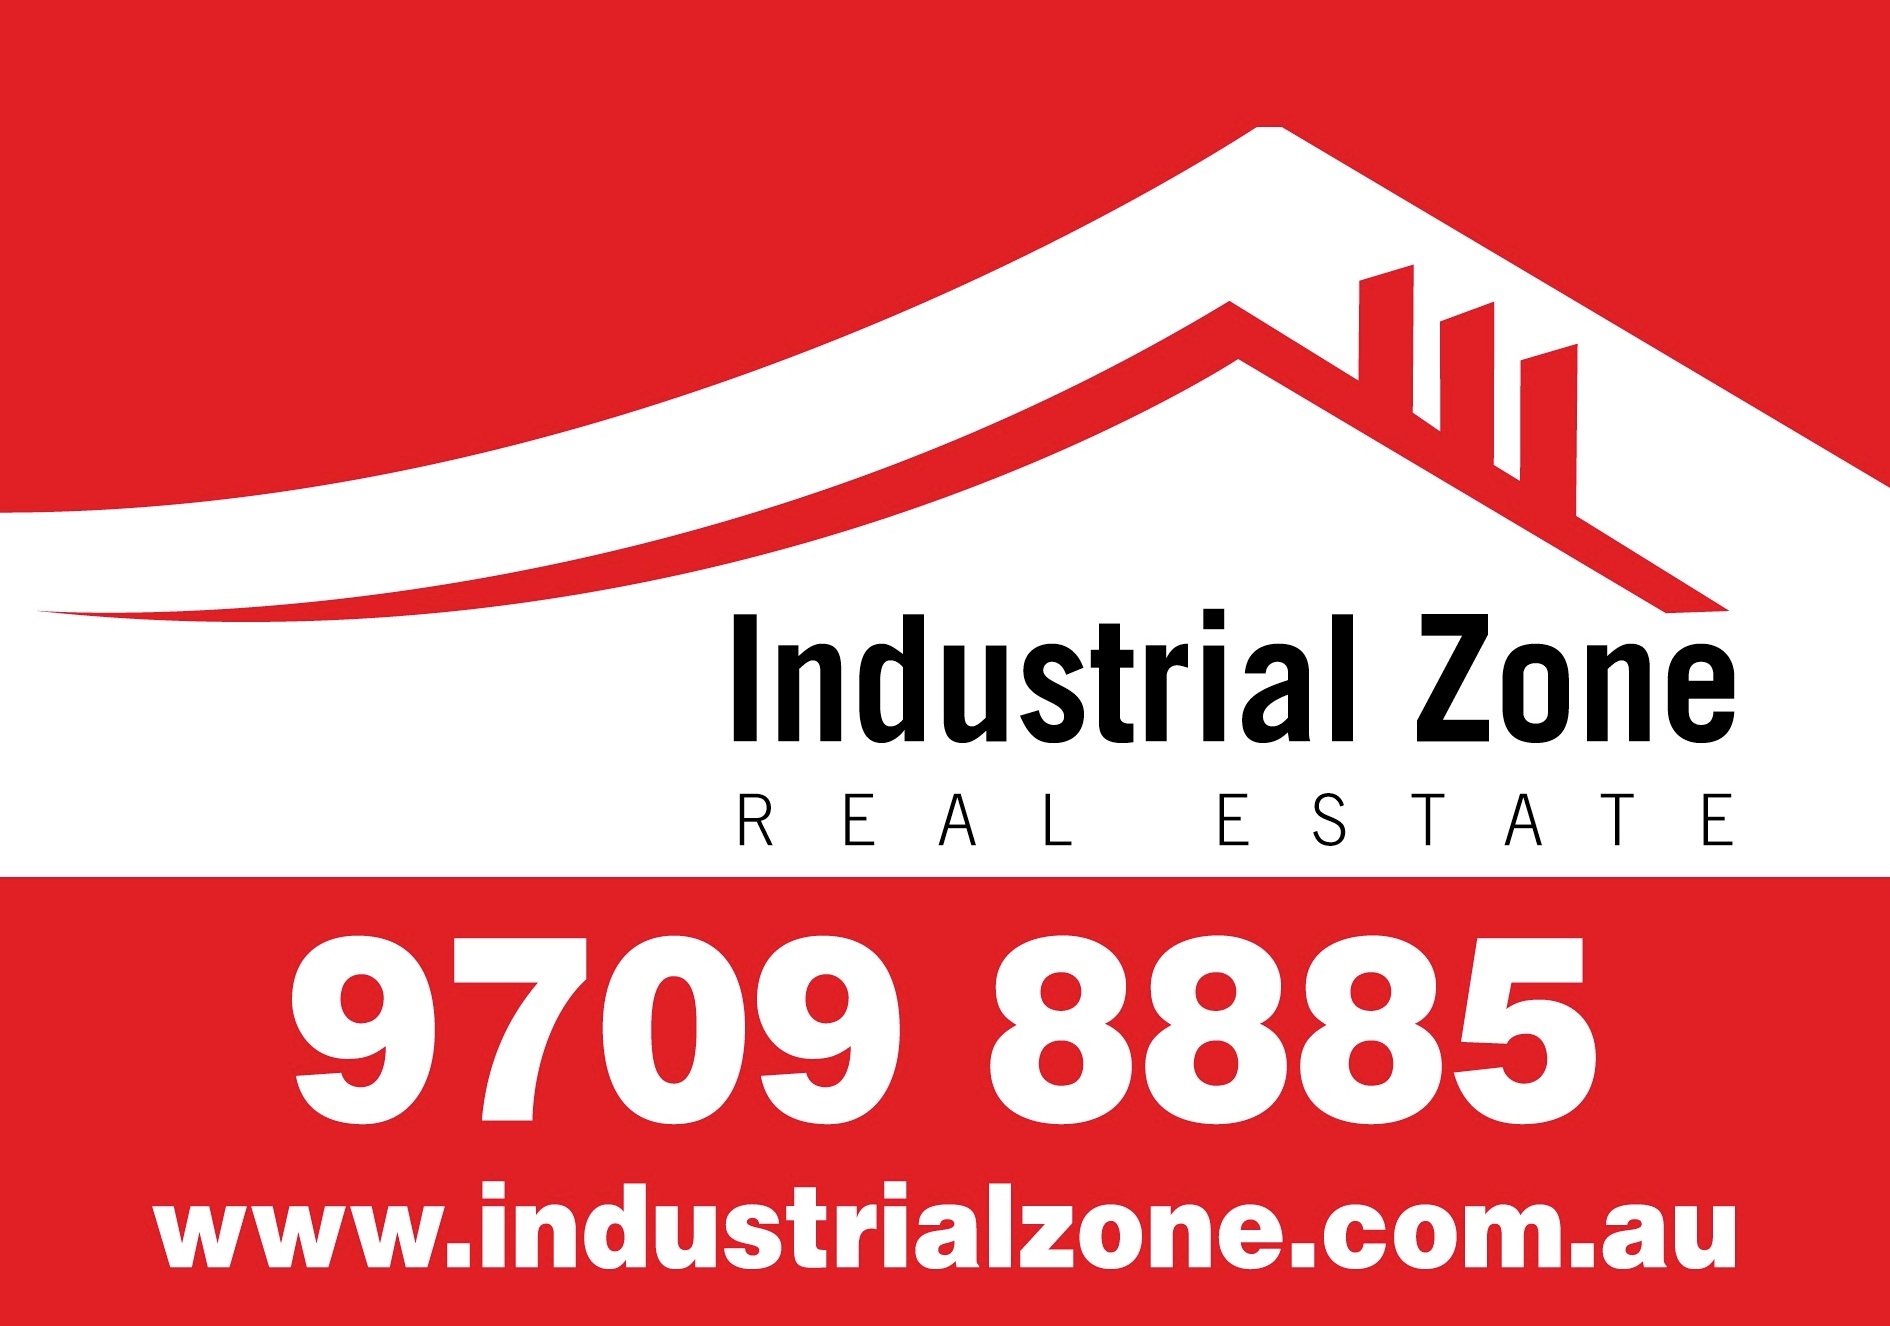 Industrial Zone Real Estate